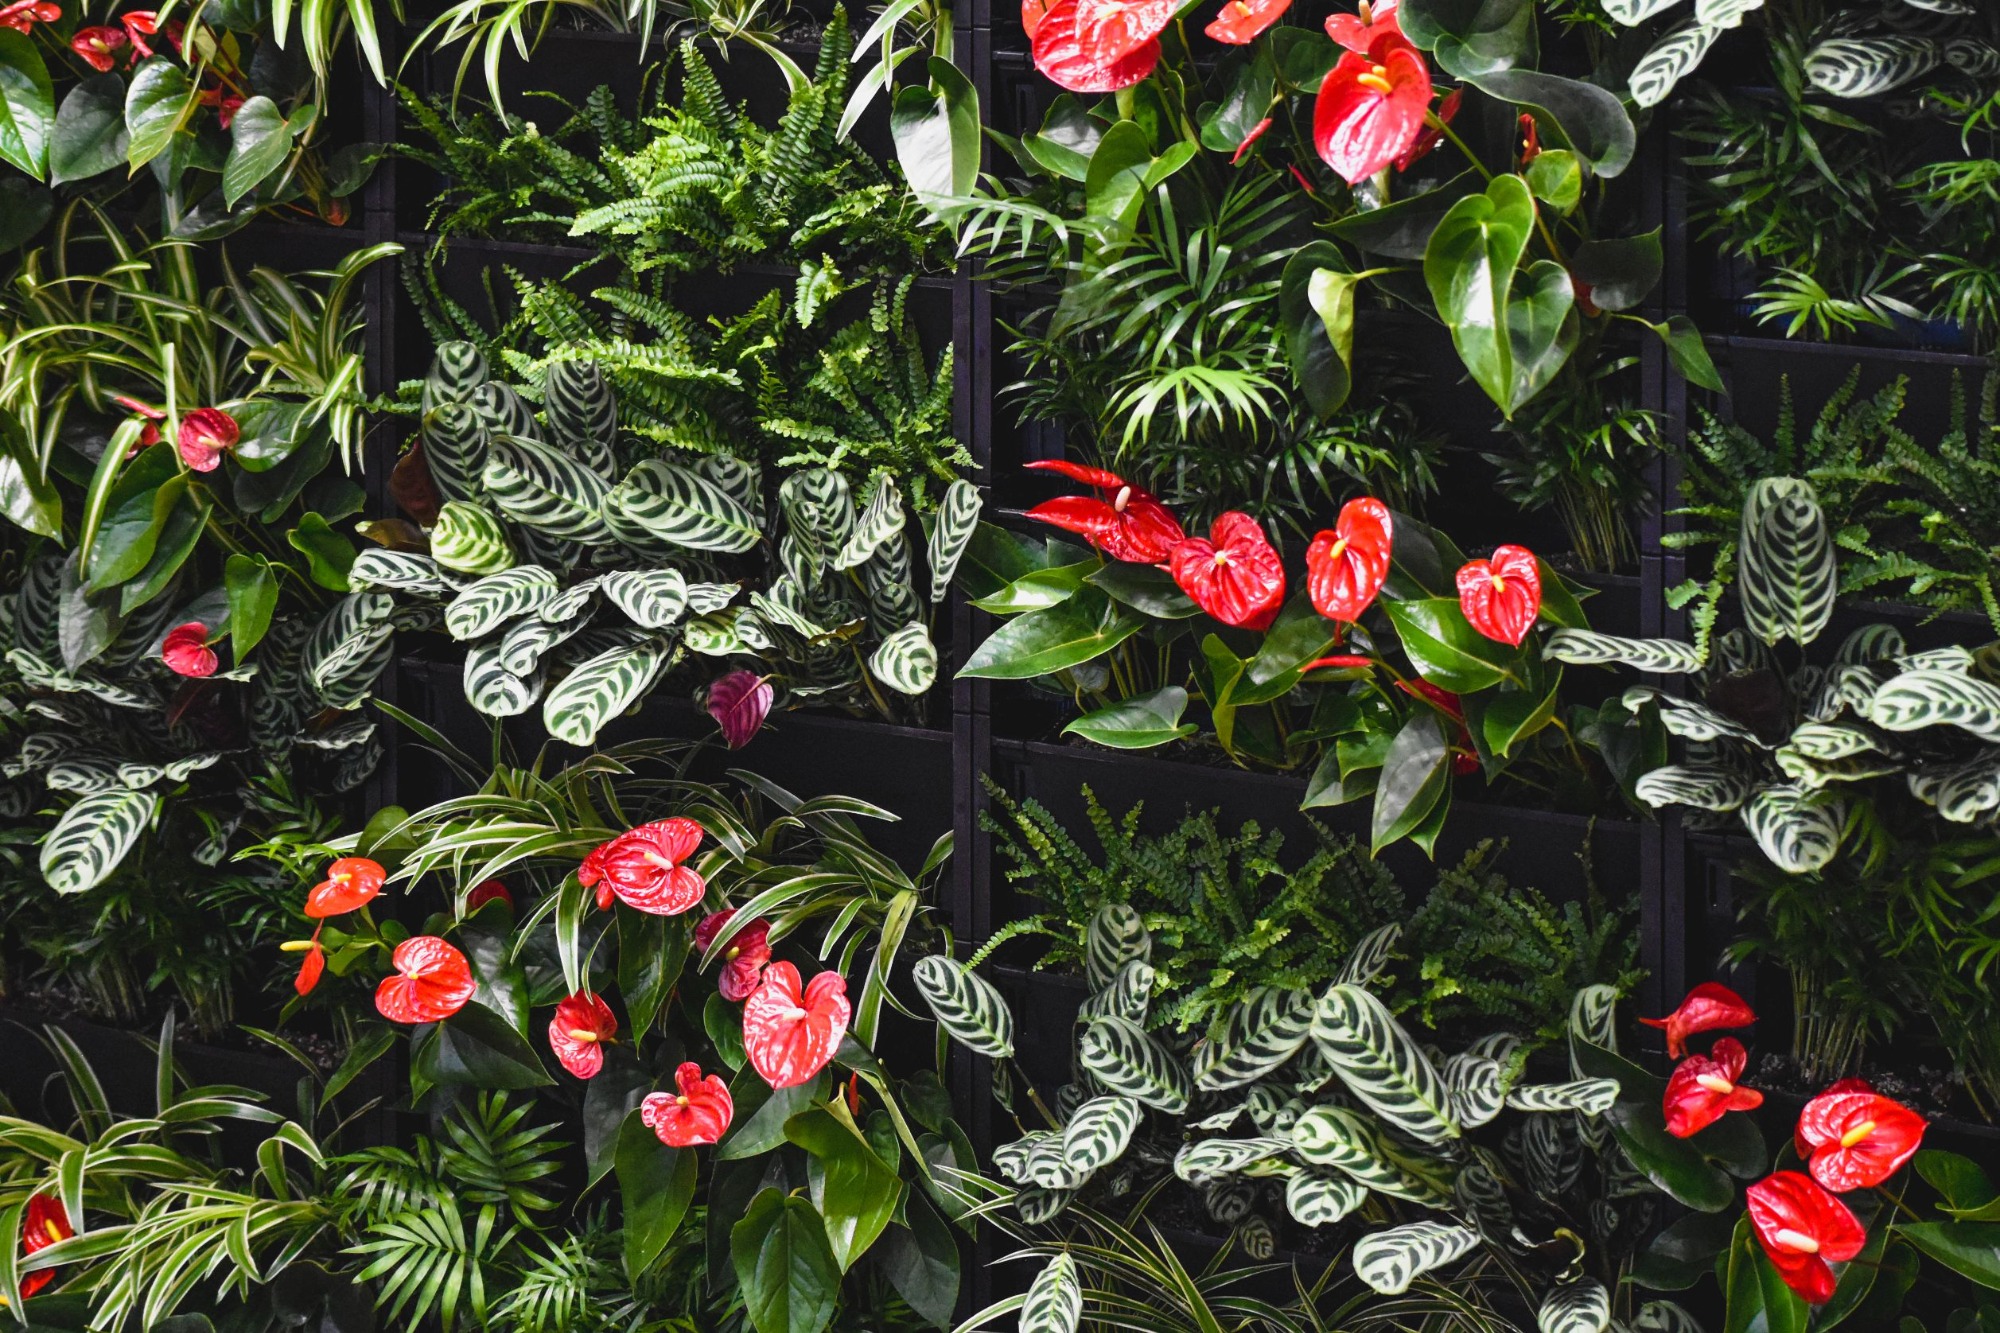 How to create a living wall?